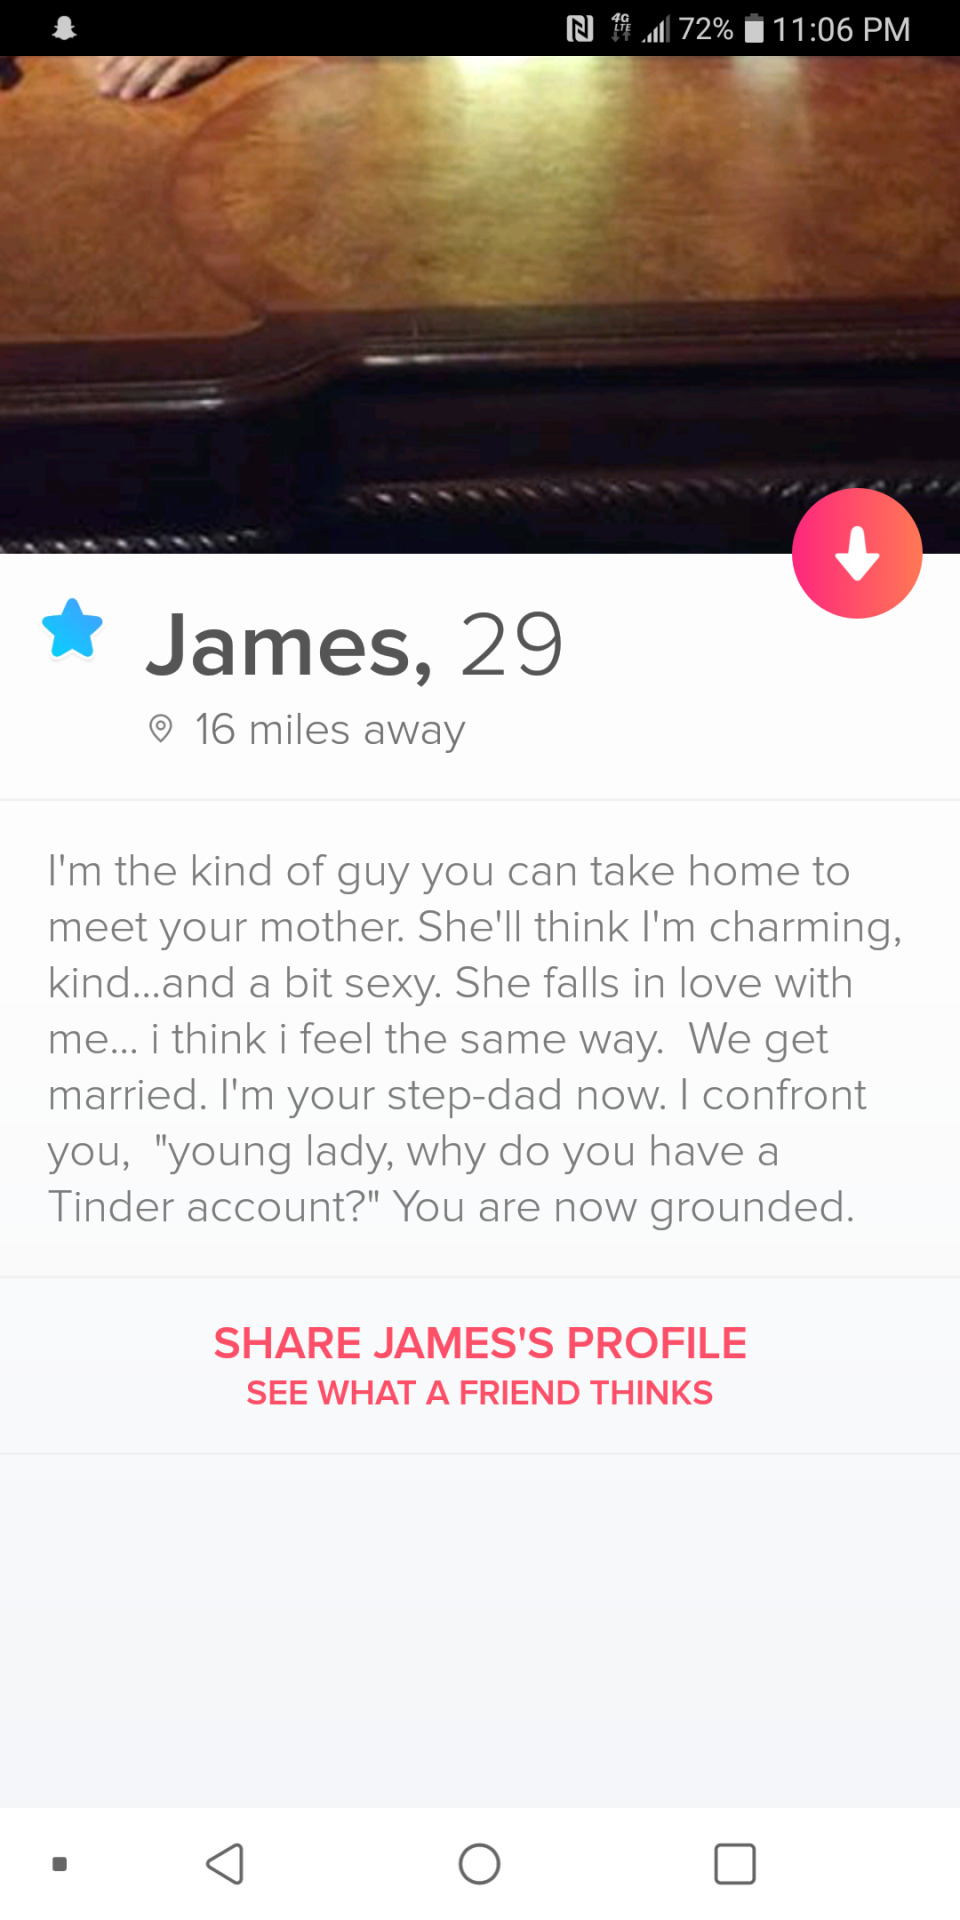 tinder - website - N 4 Jul 72% 1 James, 29 16 miles away I'm the kind of guy you can take home to meet your mother. She'll think I'm charming, kind...and a bit sexy. She falls in love with me... i think i feel the same way. We get married. I'm your stepda